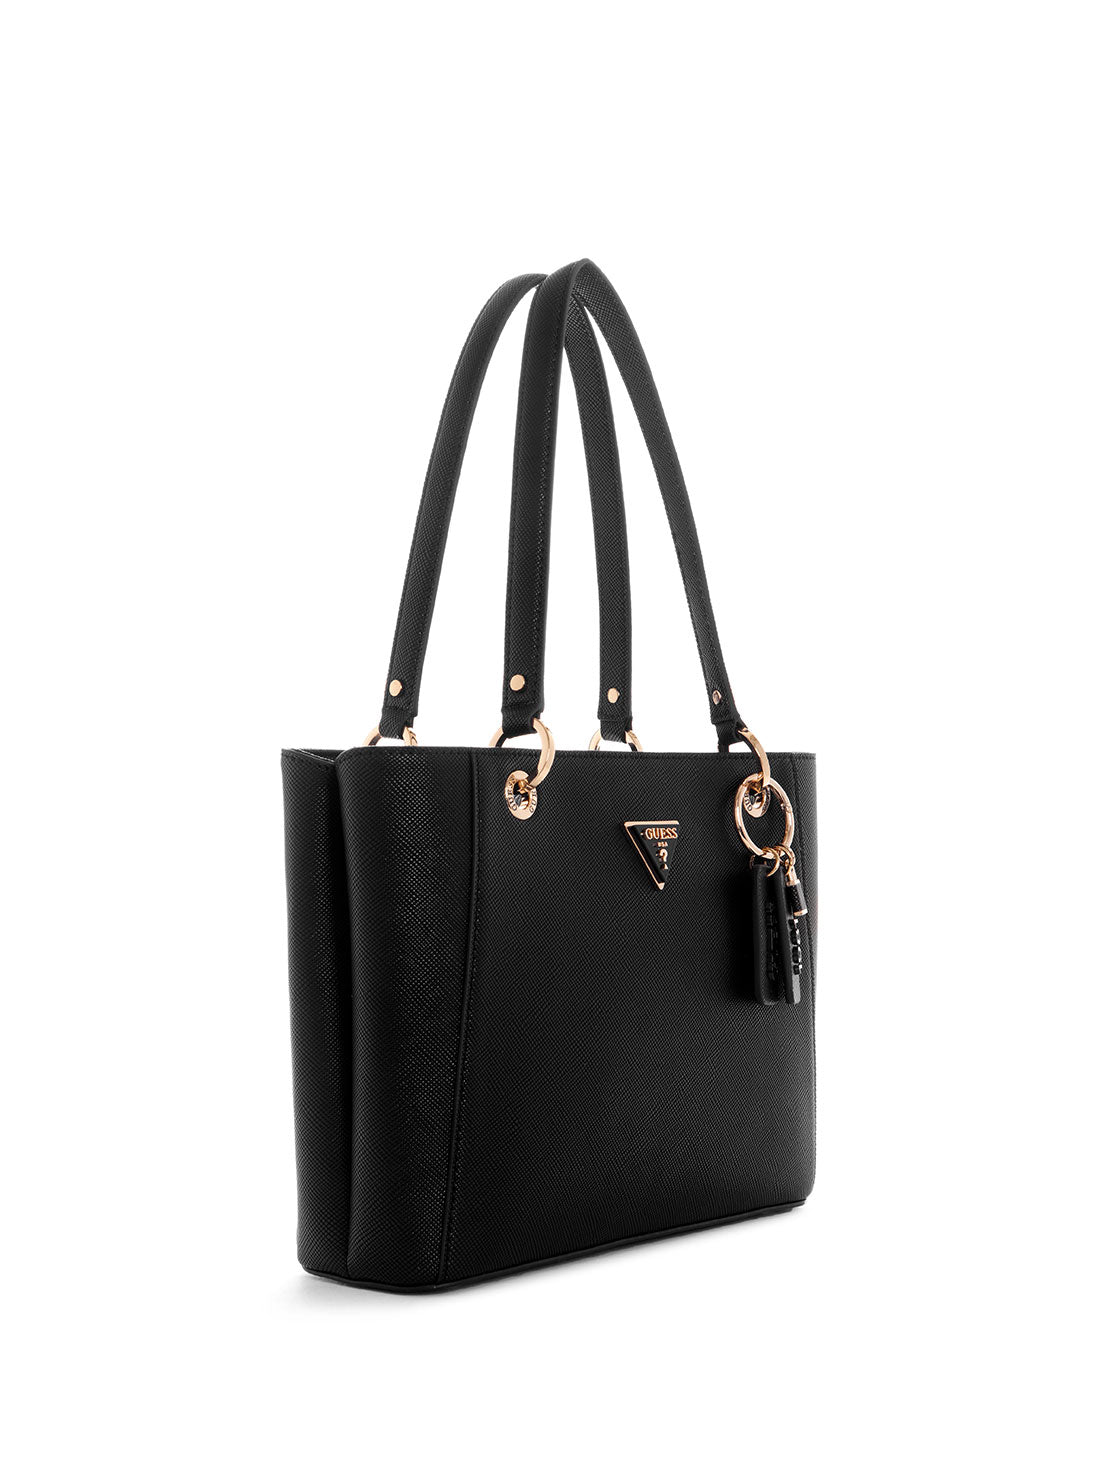 GUESS Women's Black Noelle Small Noel Tote Bag ZG787924 Angle View